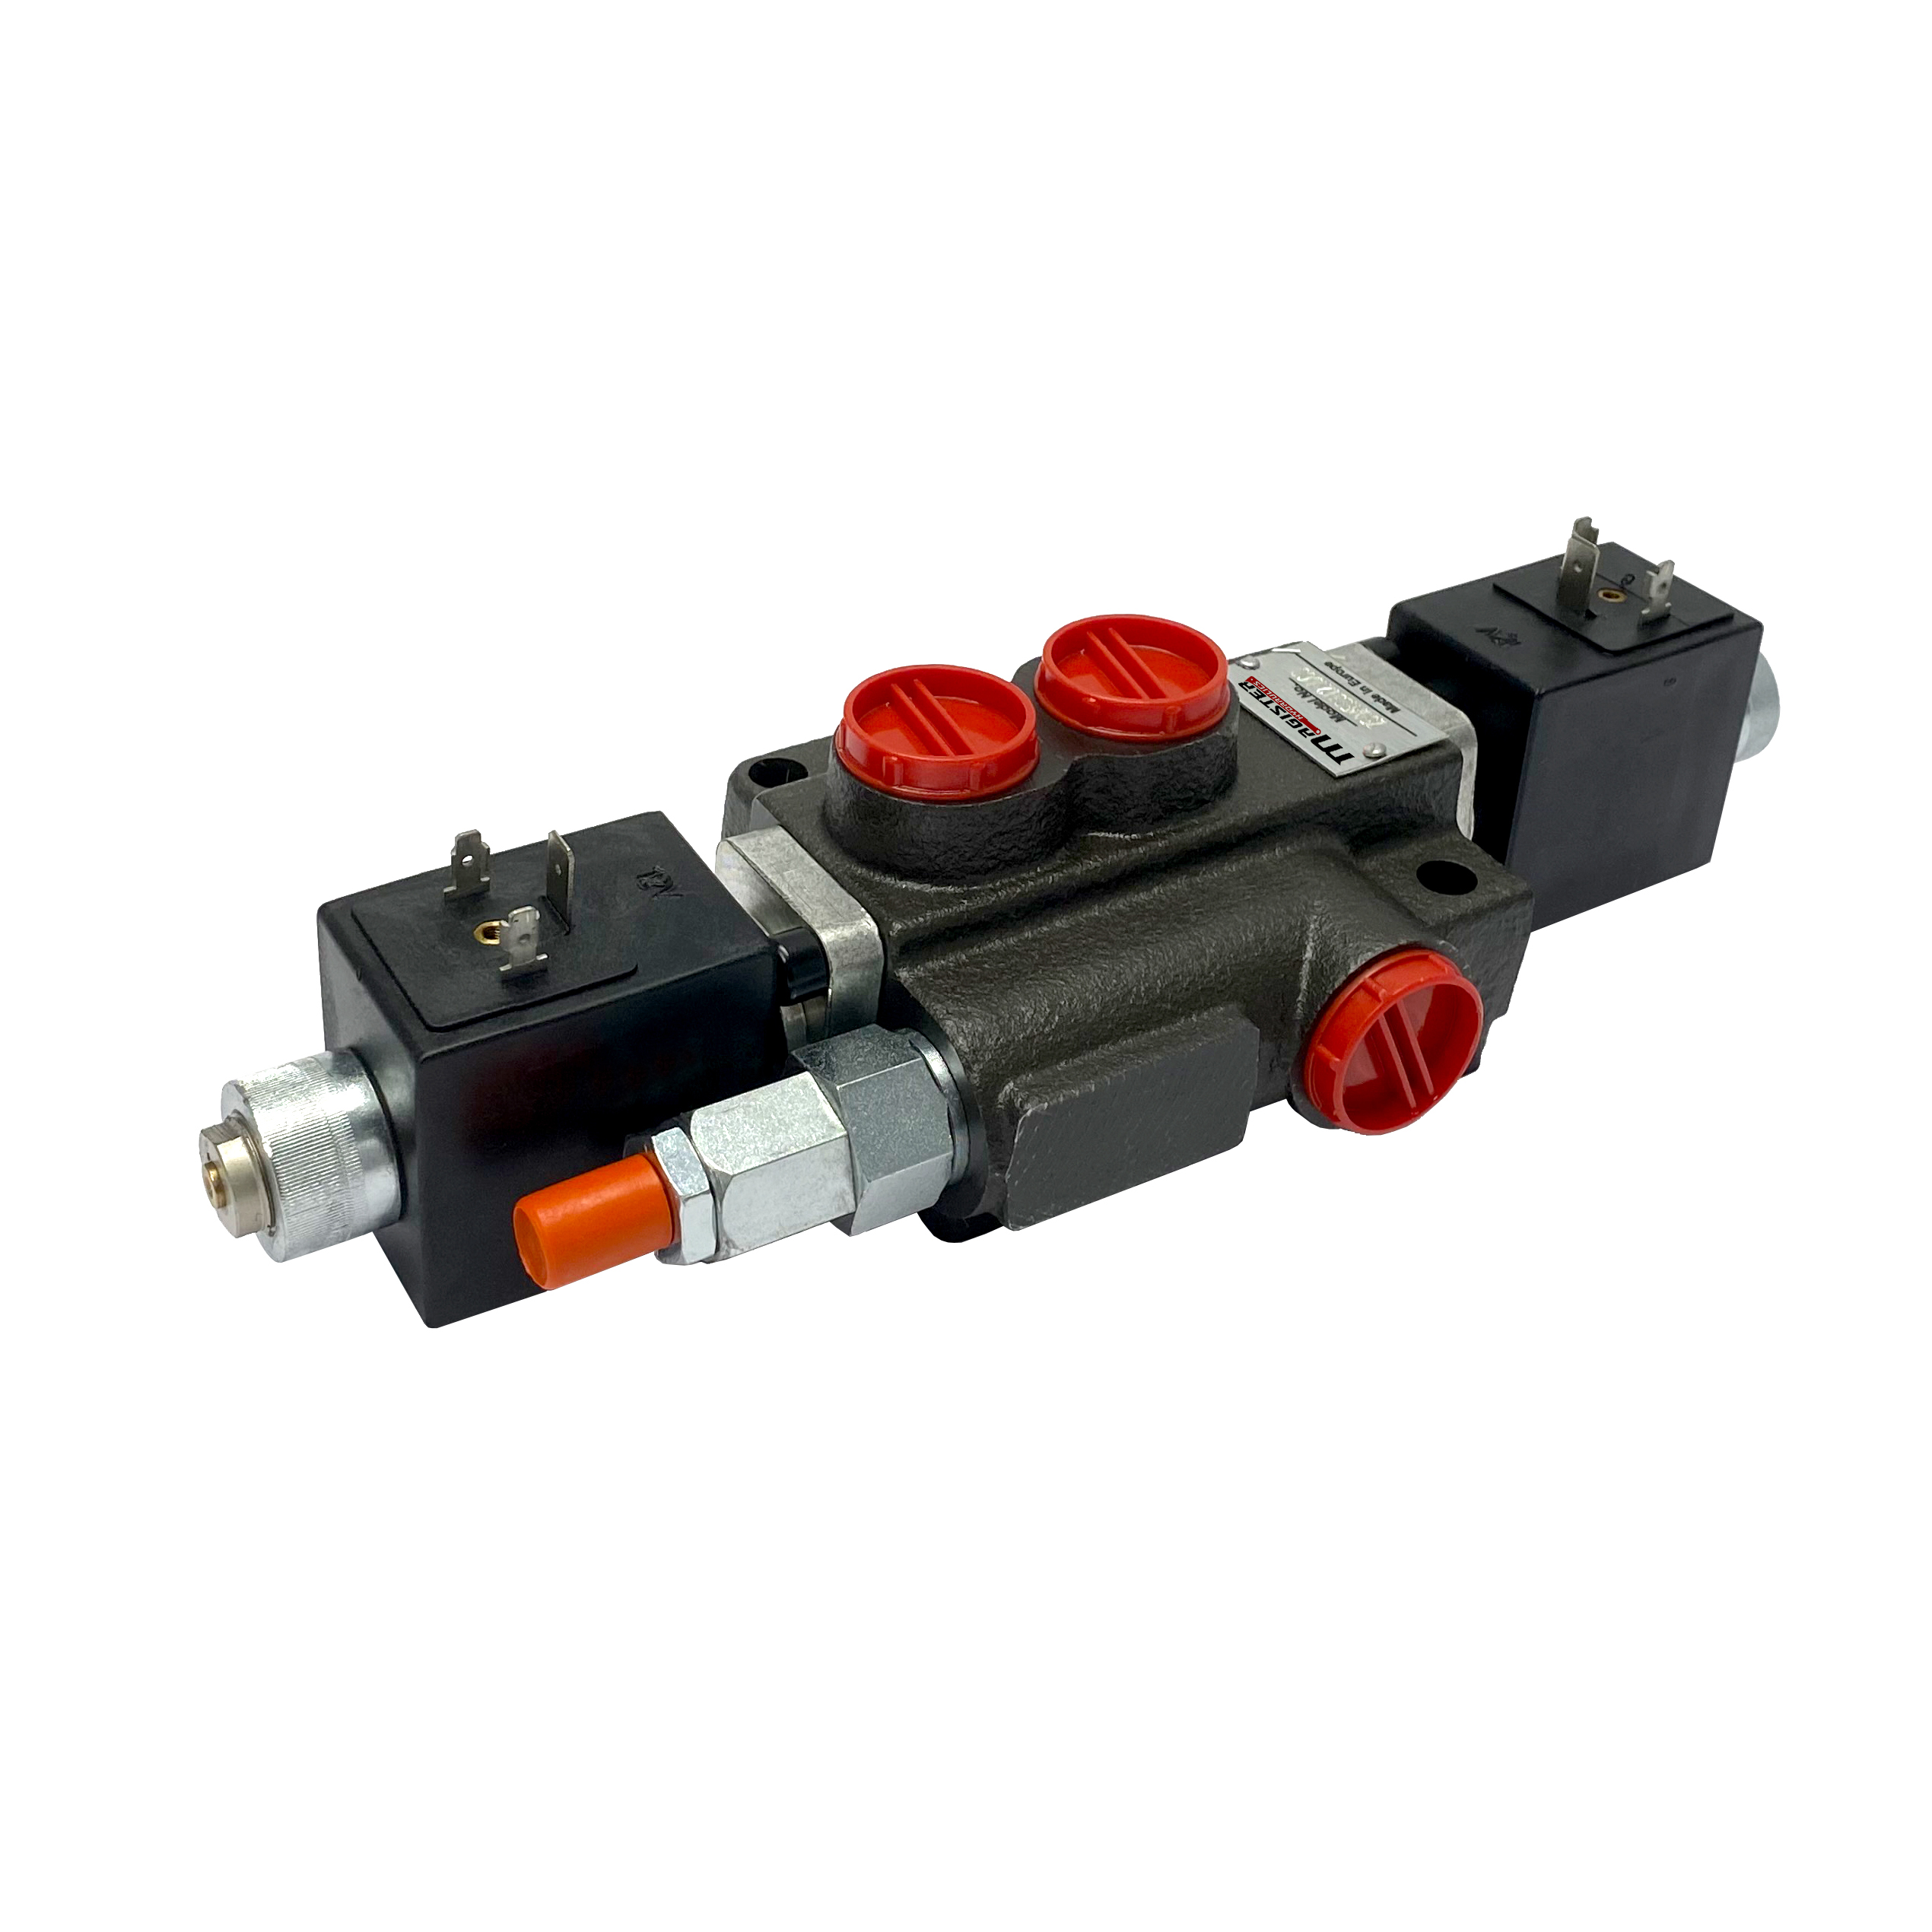 Details about   1 spool hydraulic solenoid directional control valve 13gpm 12VDC monoblock